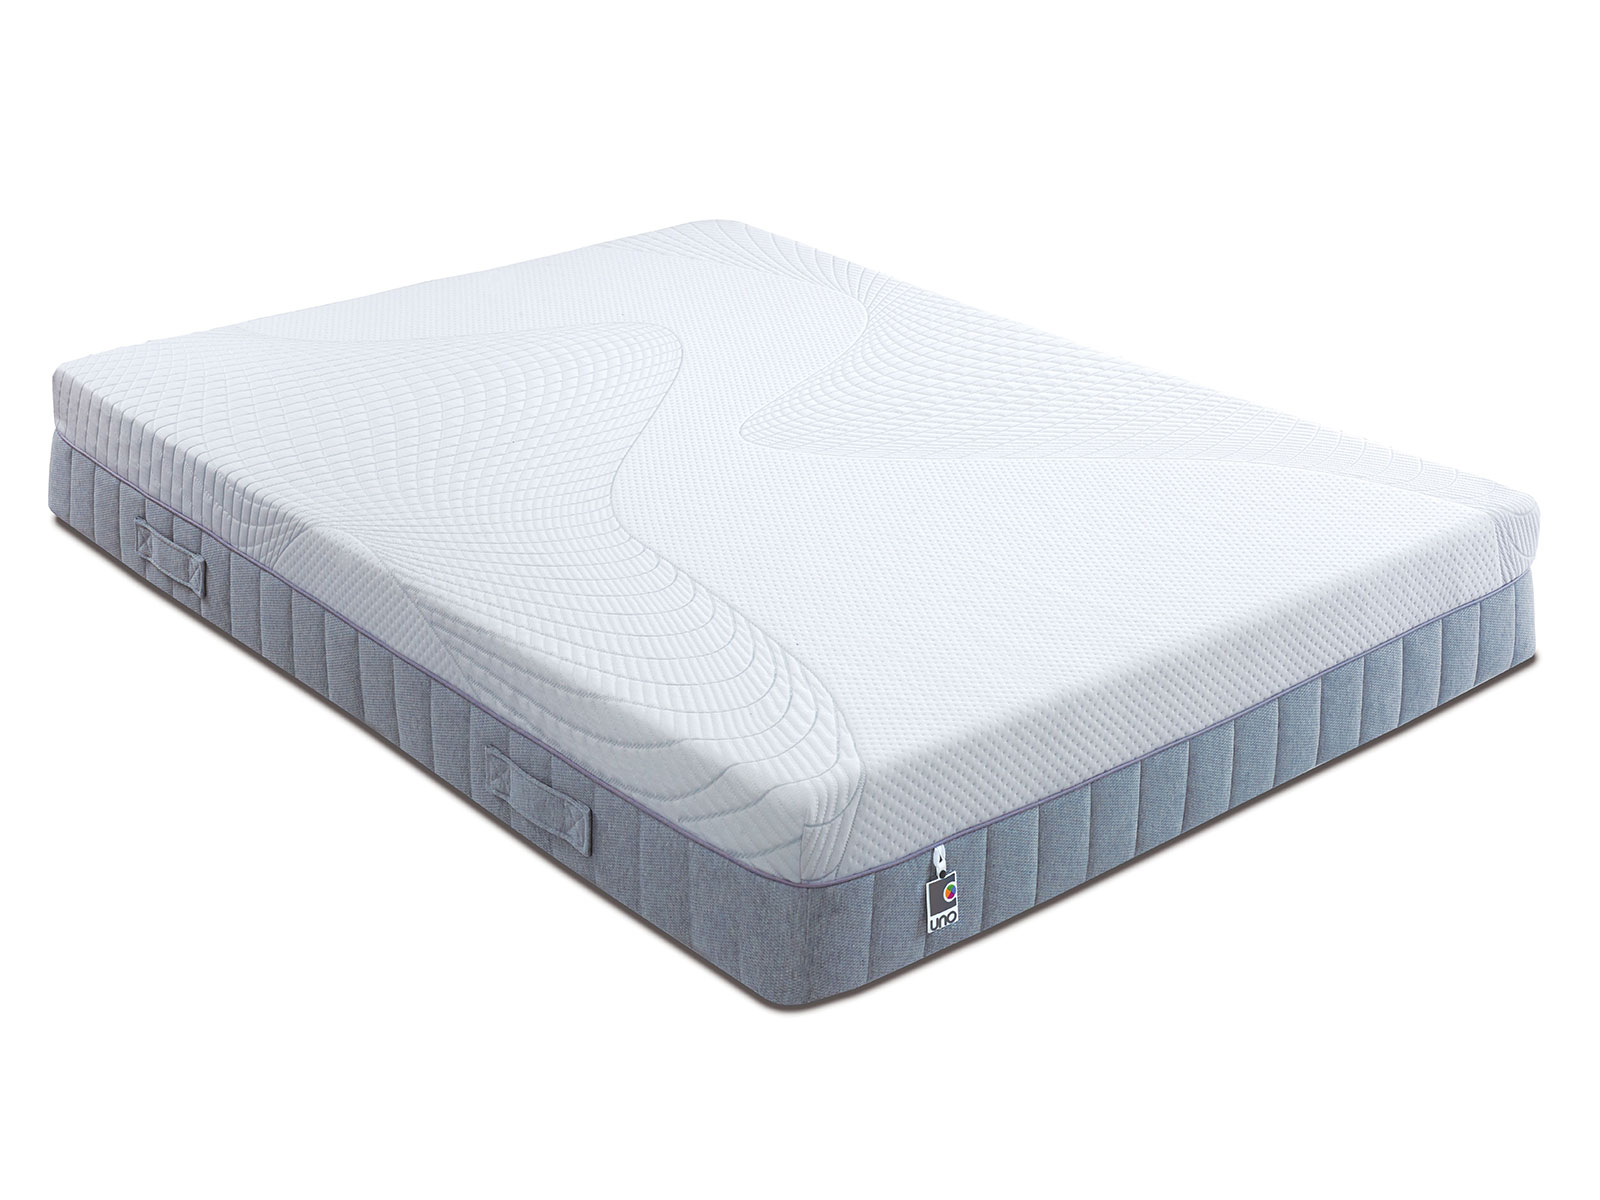 6ft Super King Size Breasley Uno Comfort Memory Pocket Firm Mattress